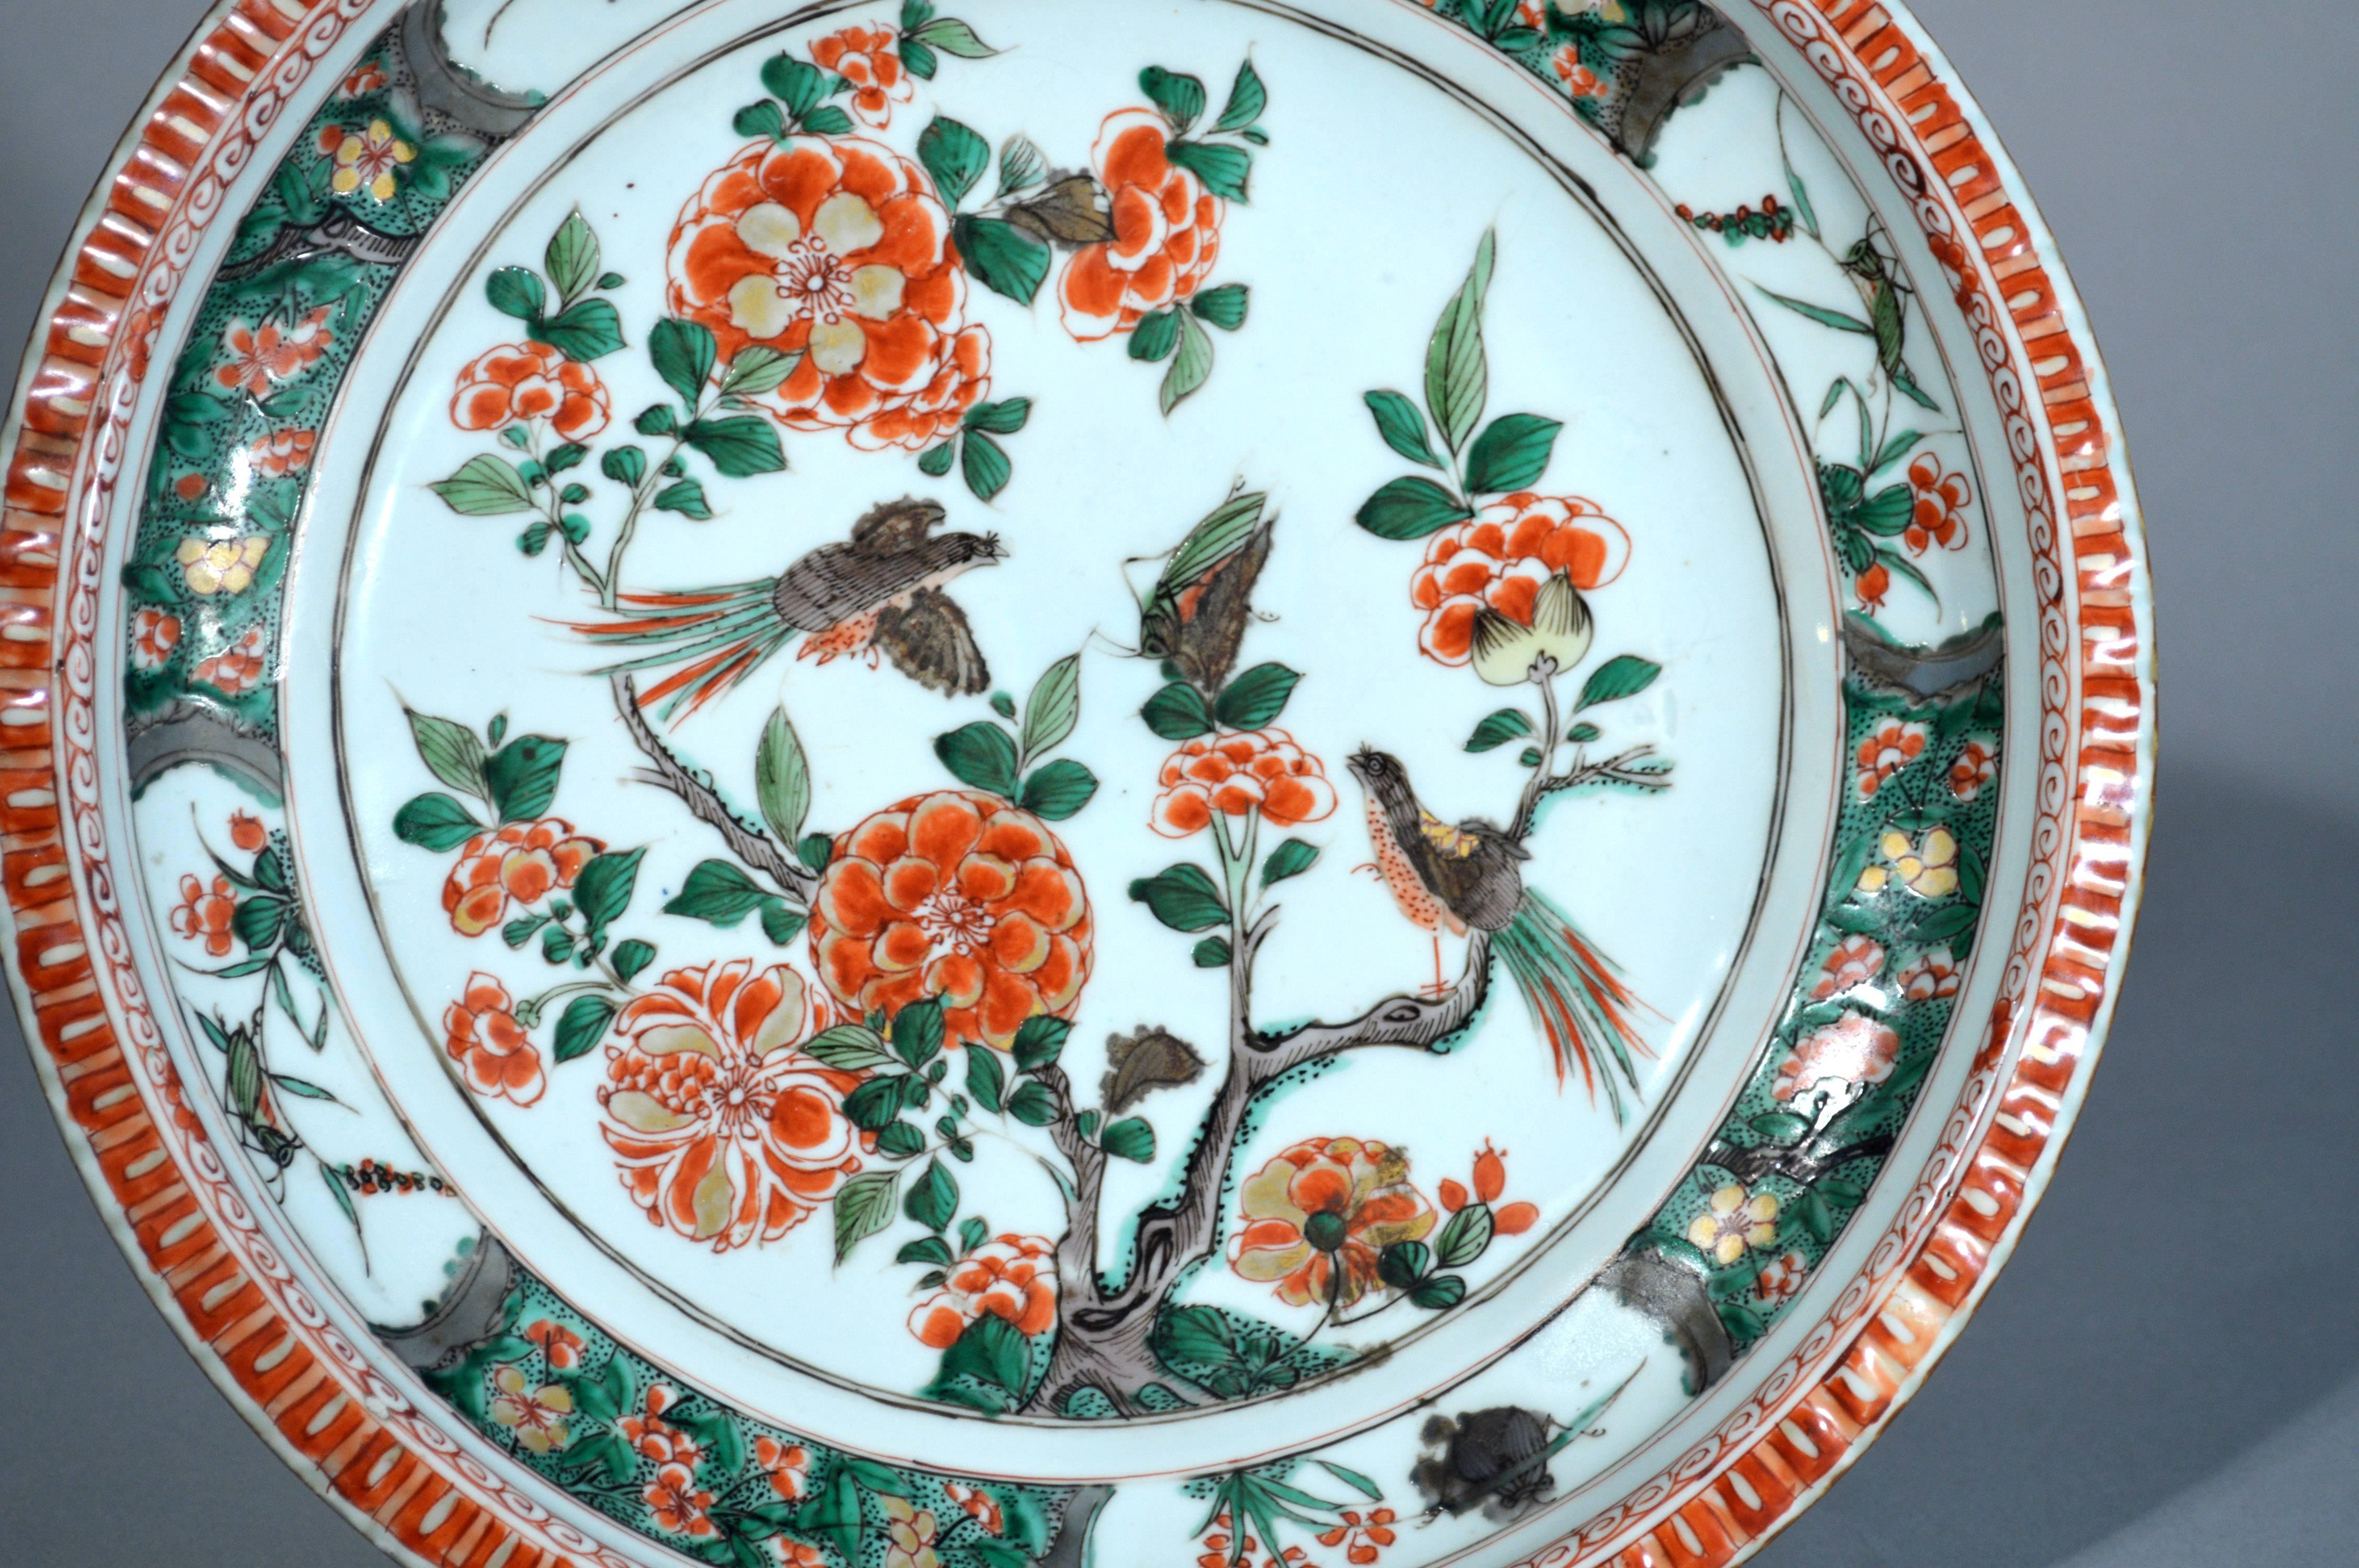 Chinese export porcelain Famille Verte dish, Kangxi period, circa 1700-1720.

The circular deep dish had a central design of a tree with iron-red blossoms with one bird alighted on a branch and another hovering, both watching a large cricket which